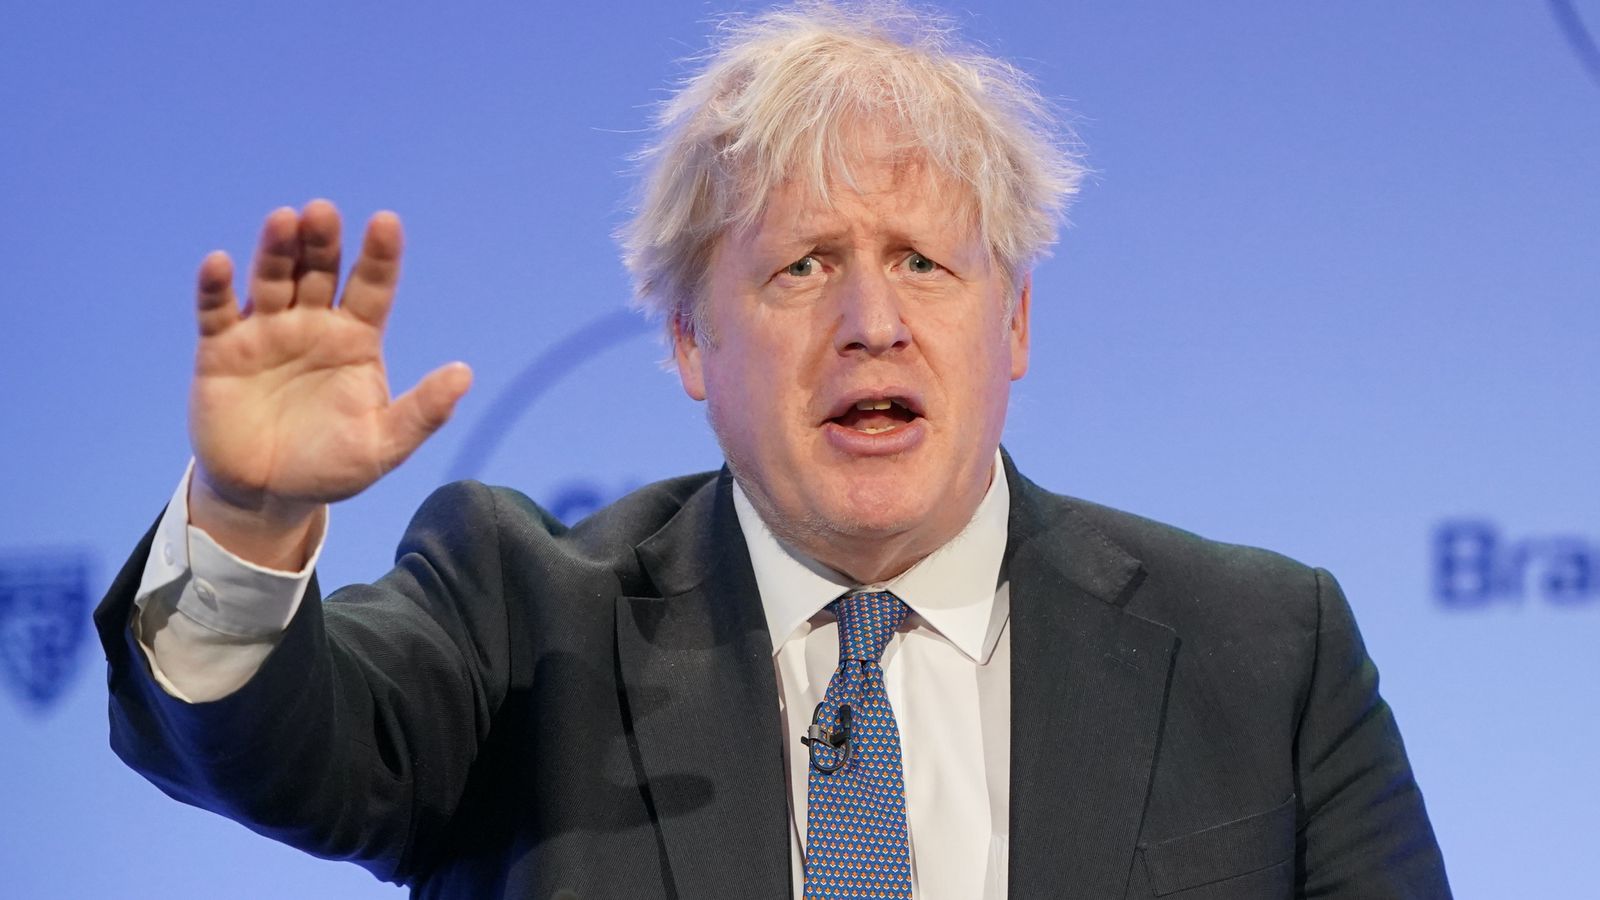 Boris Johnson denied special access to parliament as MPs endorse report which said he lied